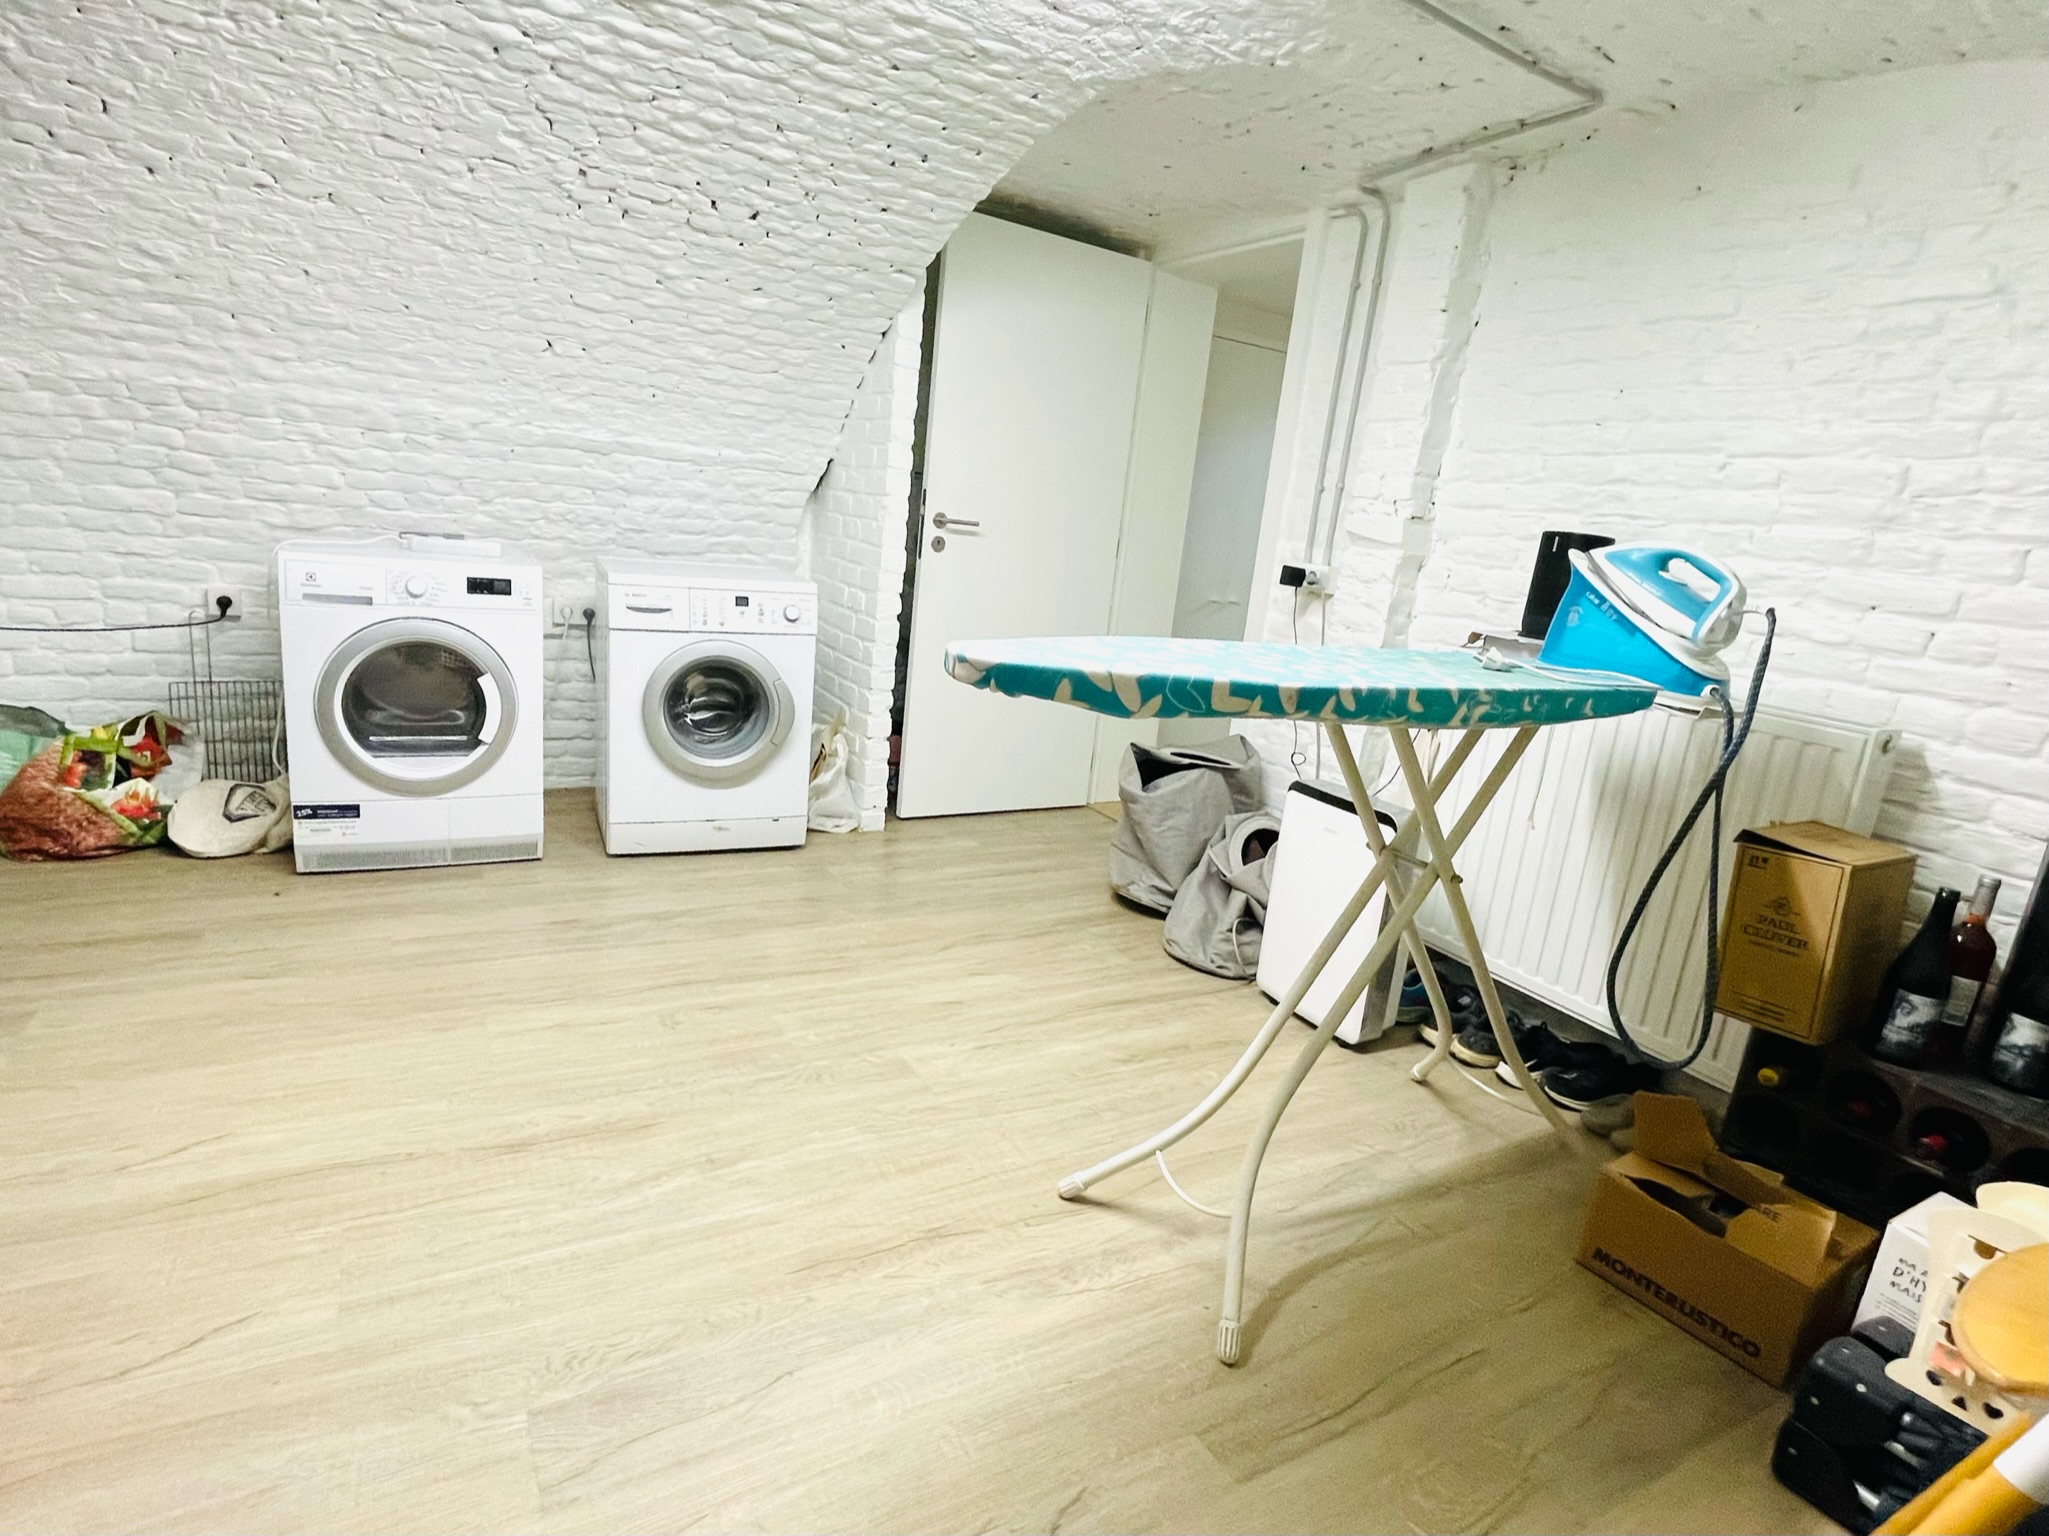 apartment for rent near brussels - laundry room